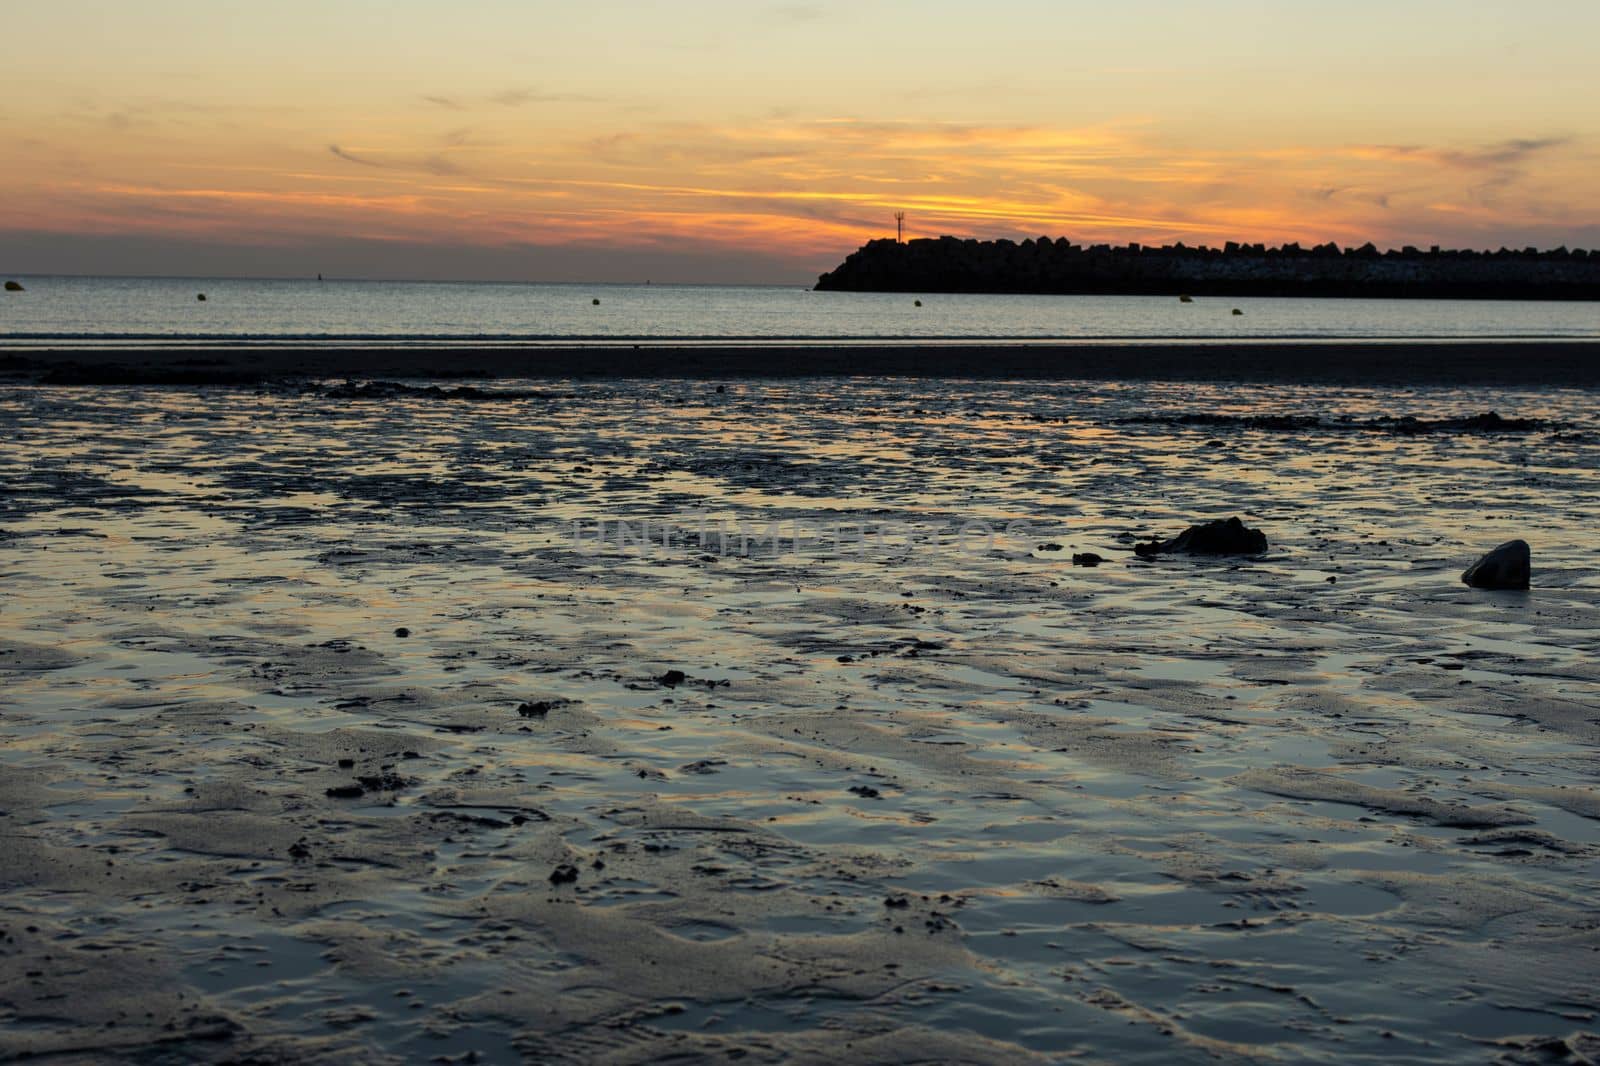 Sandy beach at low tide in the evening. Saint Jouin Bruneval, Normandy, France by scasal15